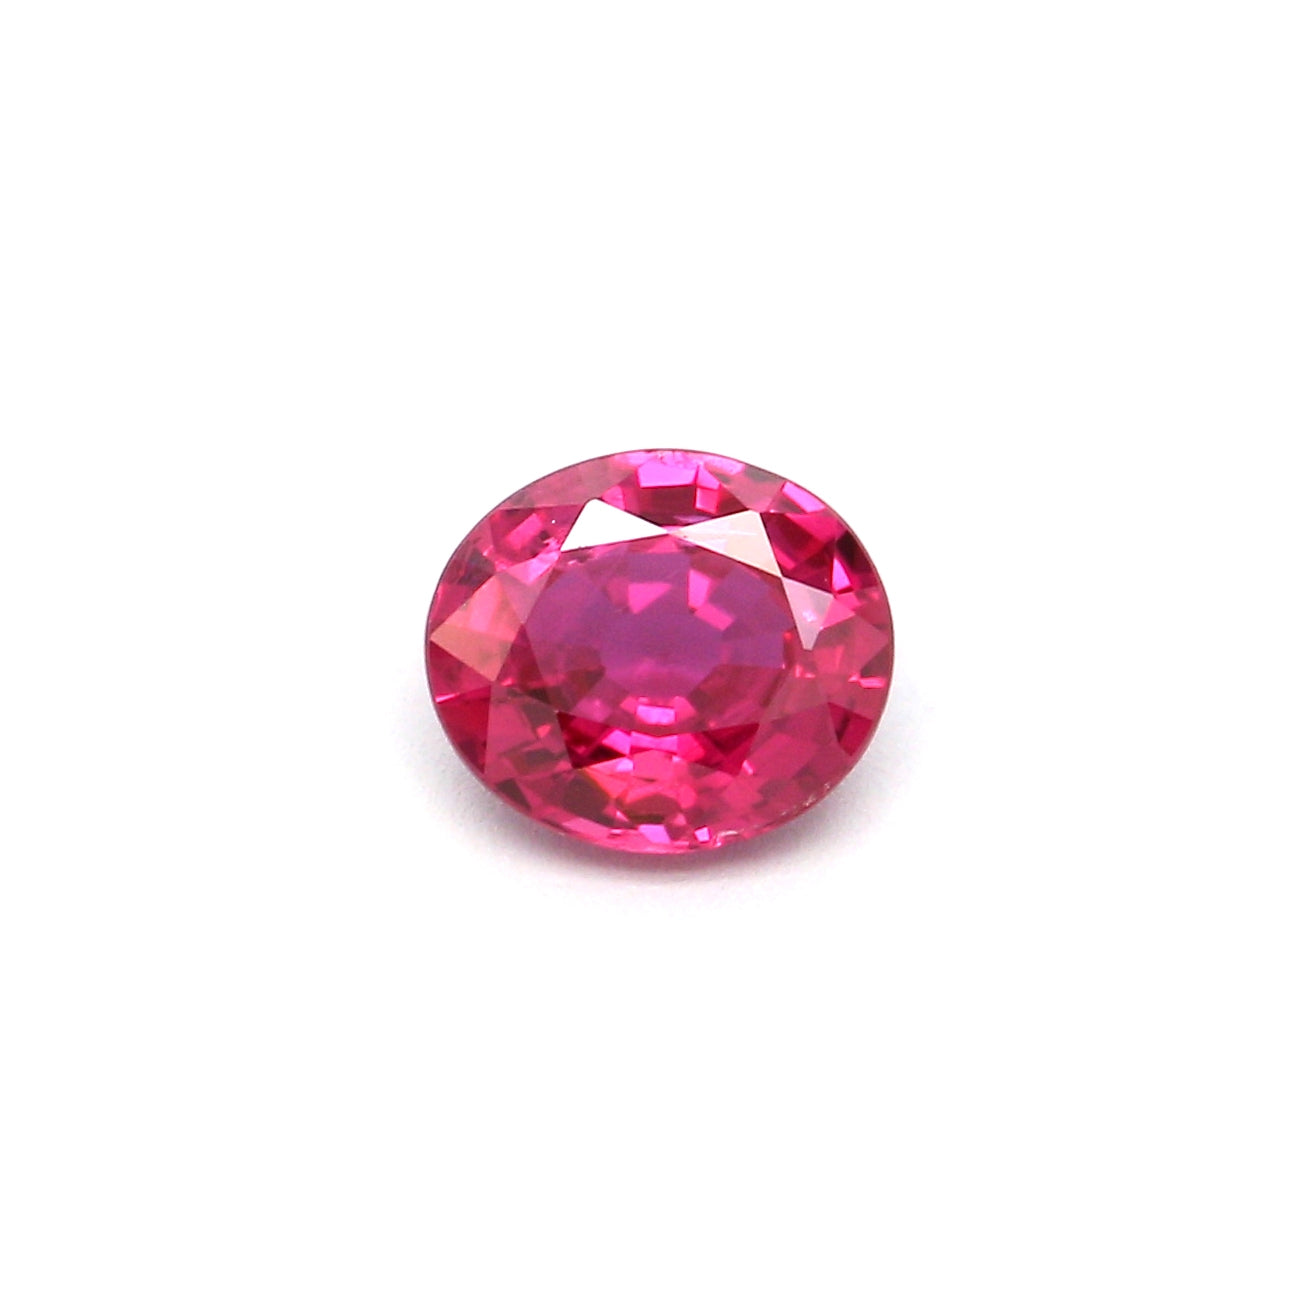 0.46ct Pinkish Red, Oval Ruby, Heated, Thailand - 5.16 x 4.47 x 2.47mm